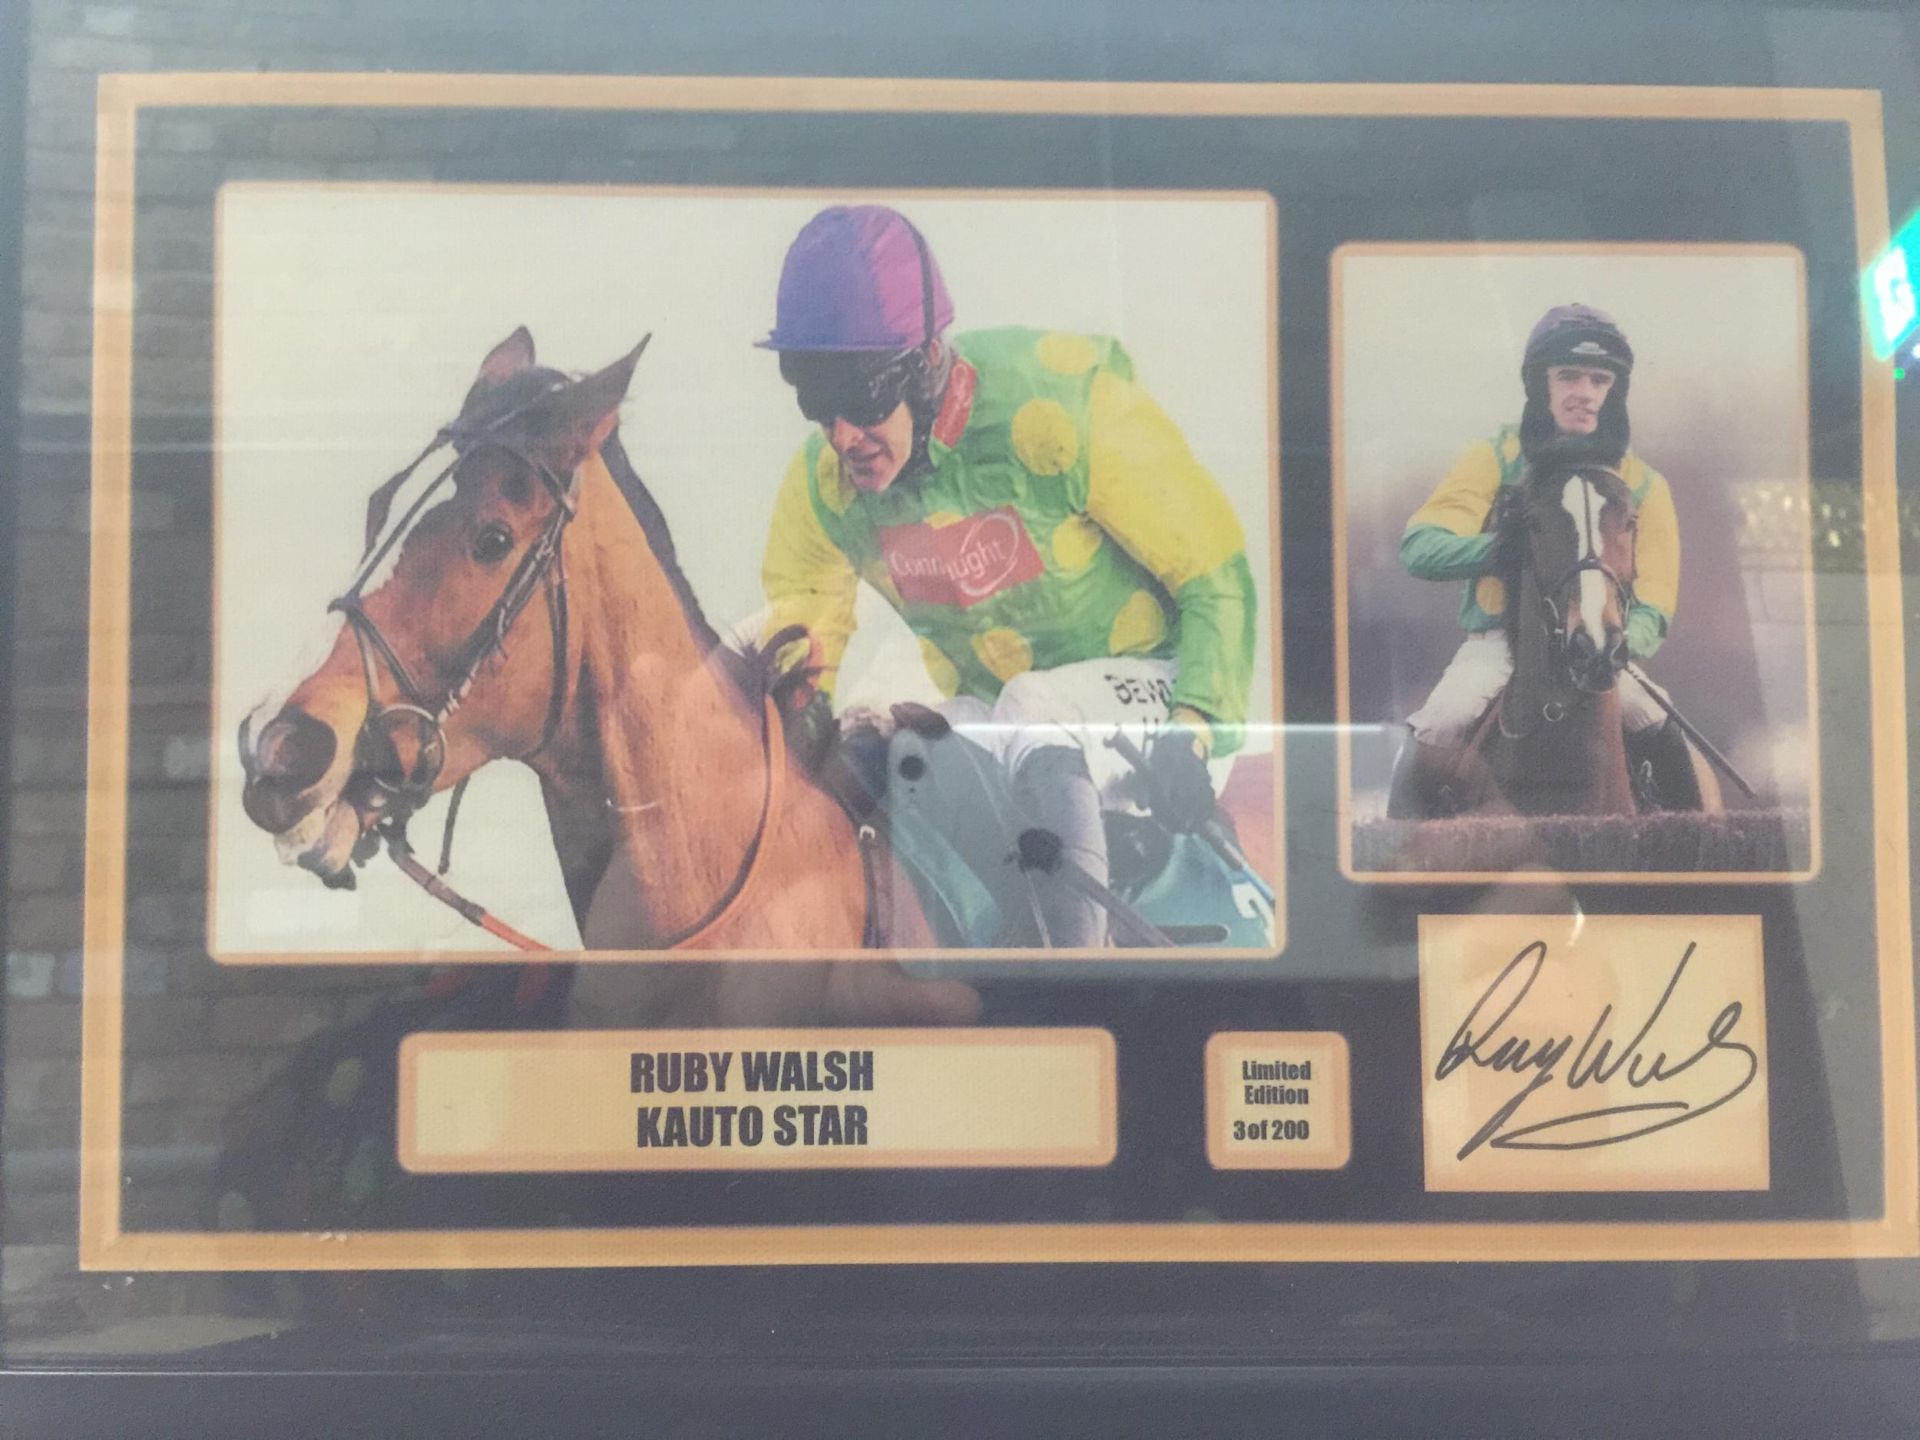 A GROUP OF FRAMED HORSE RACING LIMITED EDITION SIGNED PHOTOS, RUBY WALSH, AP MCCOY AND LESTER - Image 2 of 4